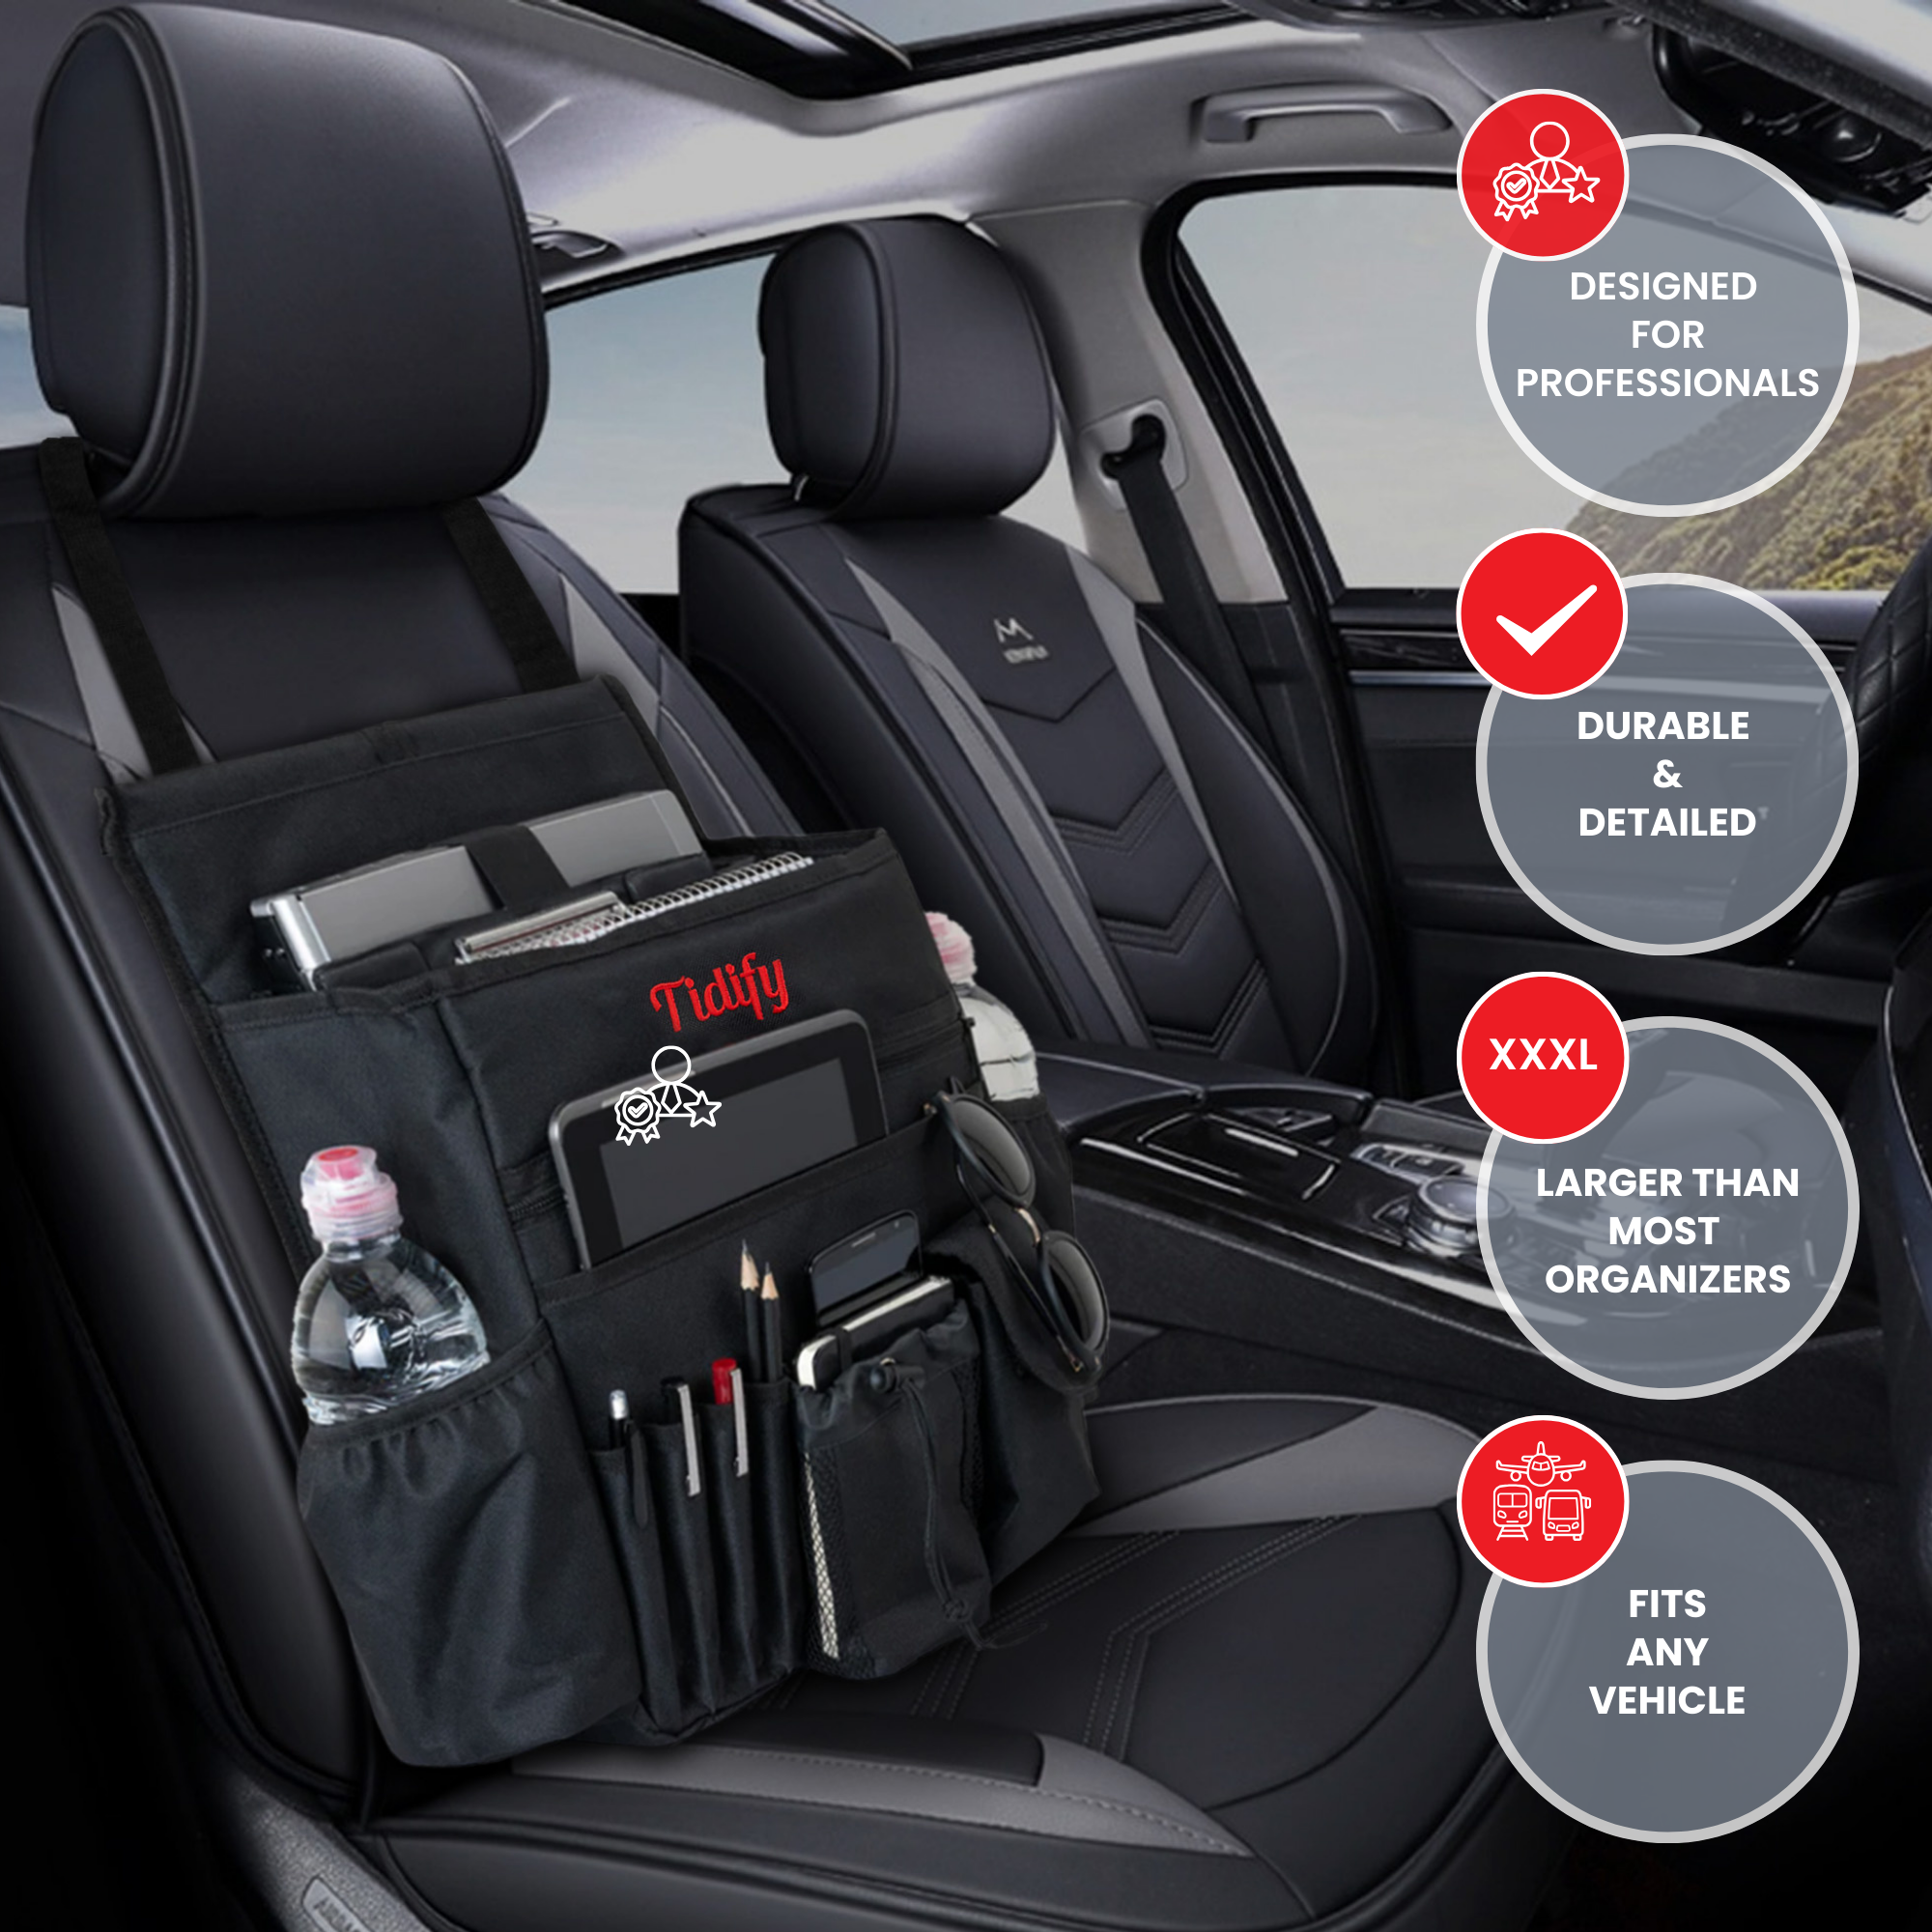 CAR SEAT ORGANIZER FOR PROFESSIONALS ON THE GO